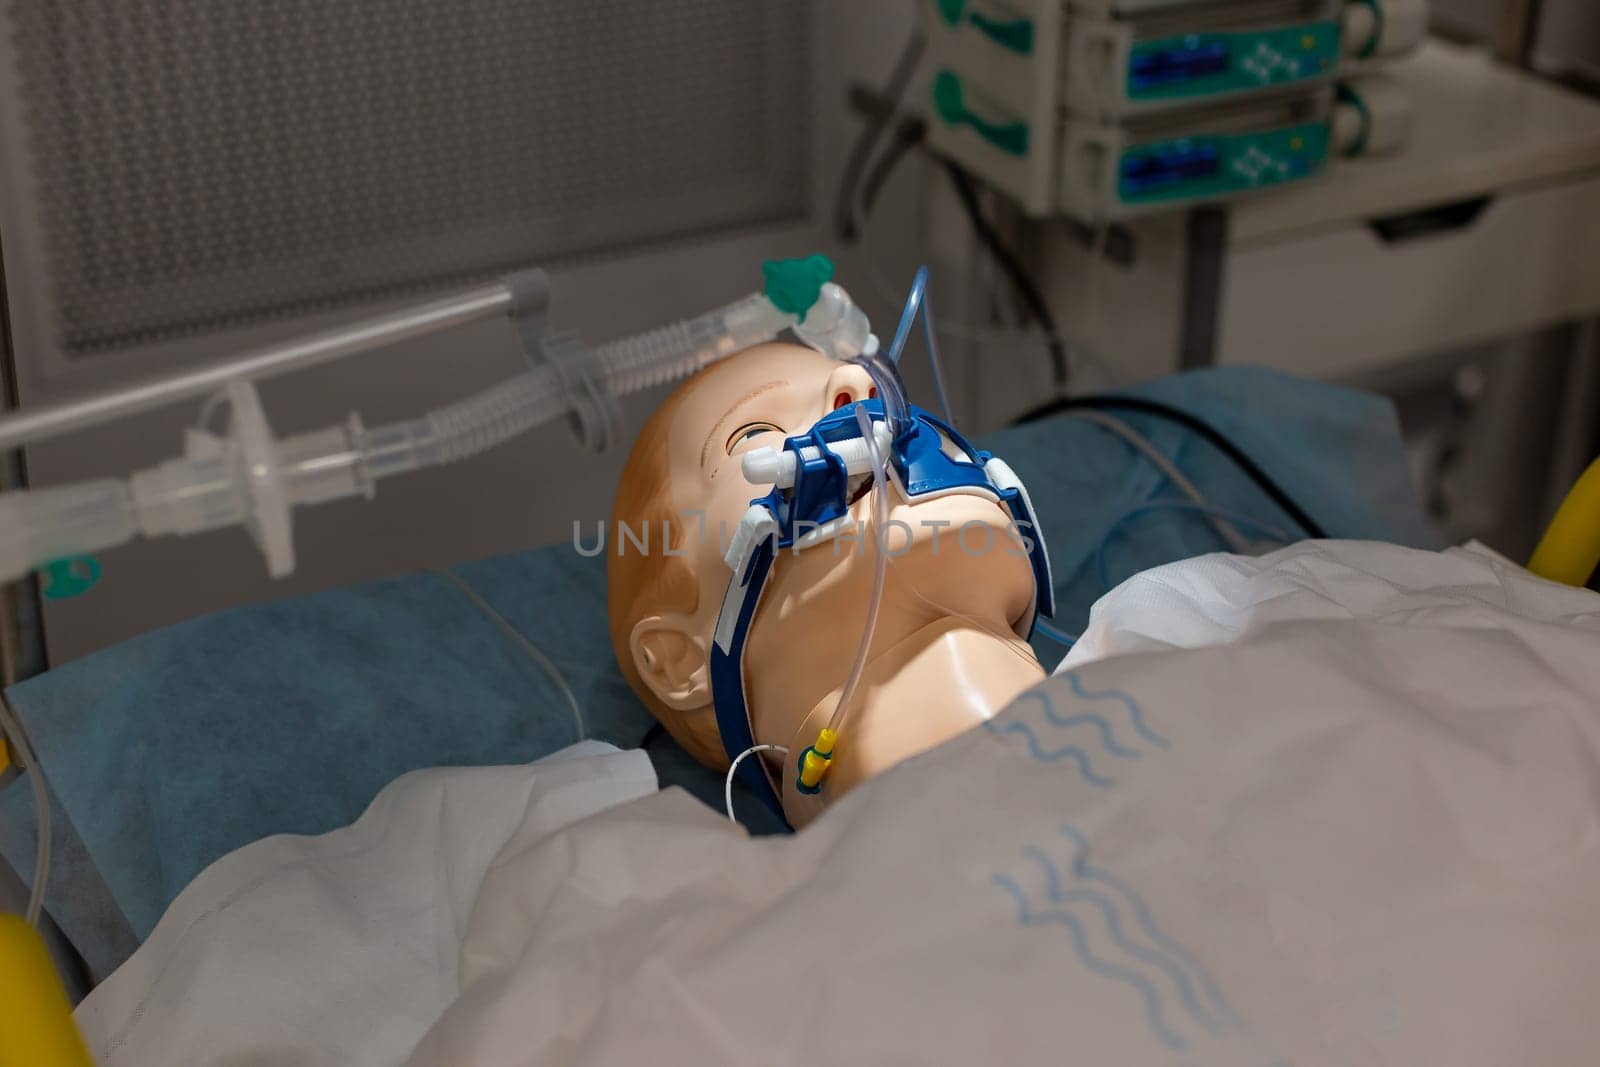 Moscow, Moscow region, Russia - 03.09.2023:Close-up of a medical practice dummy wearing an oxygen mask, used for training healthcare professionals.